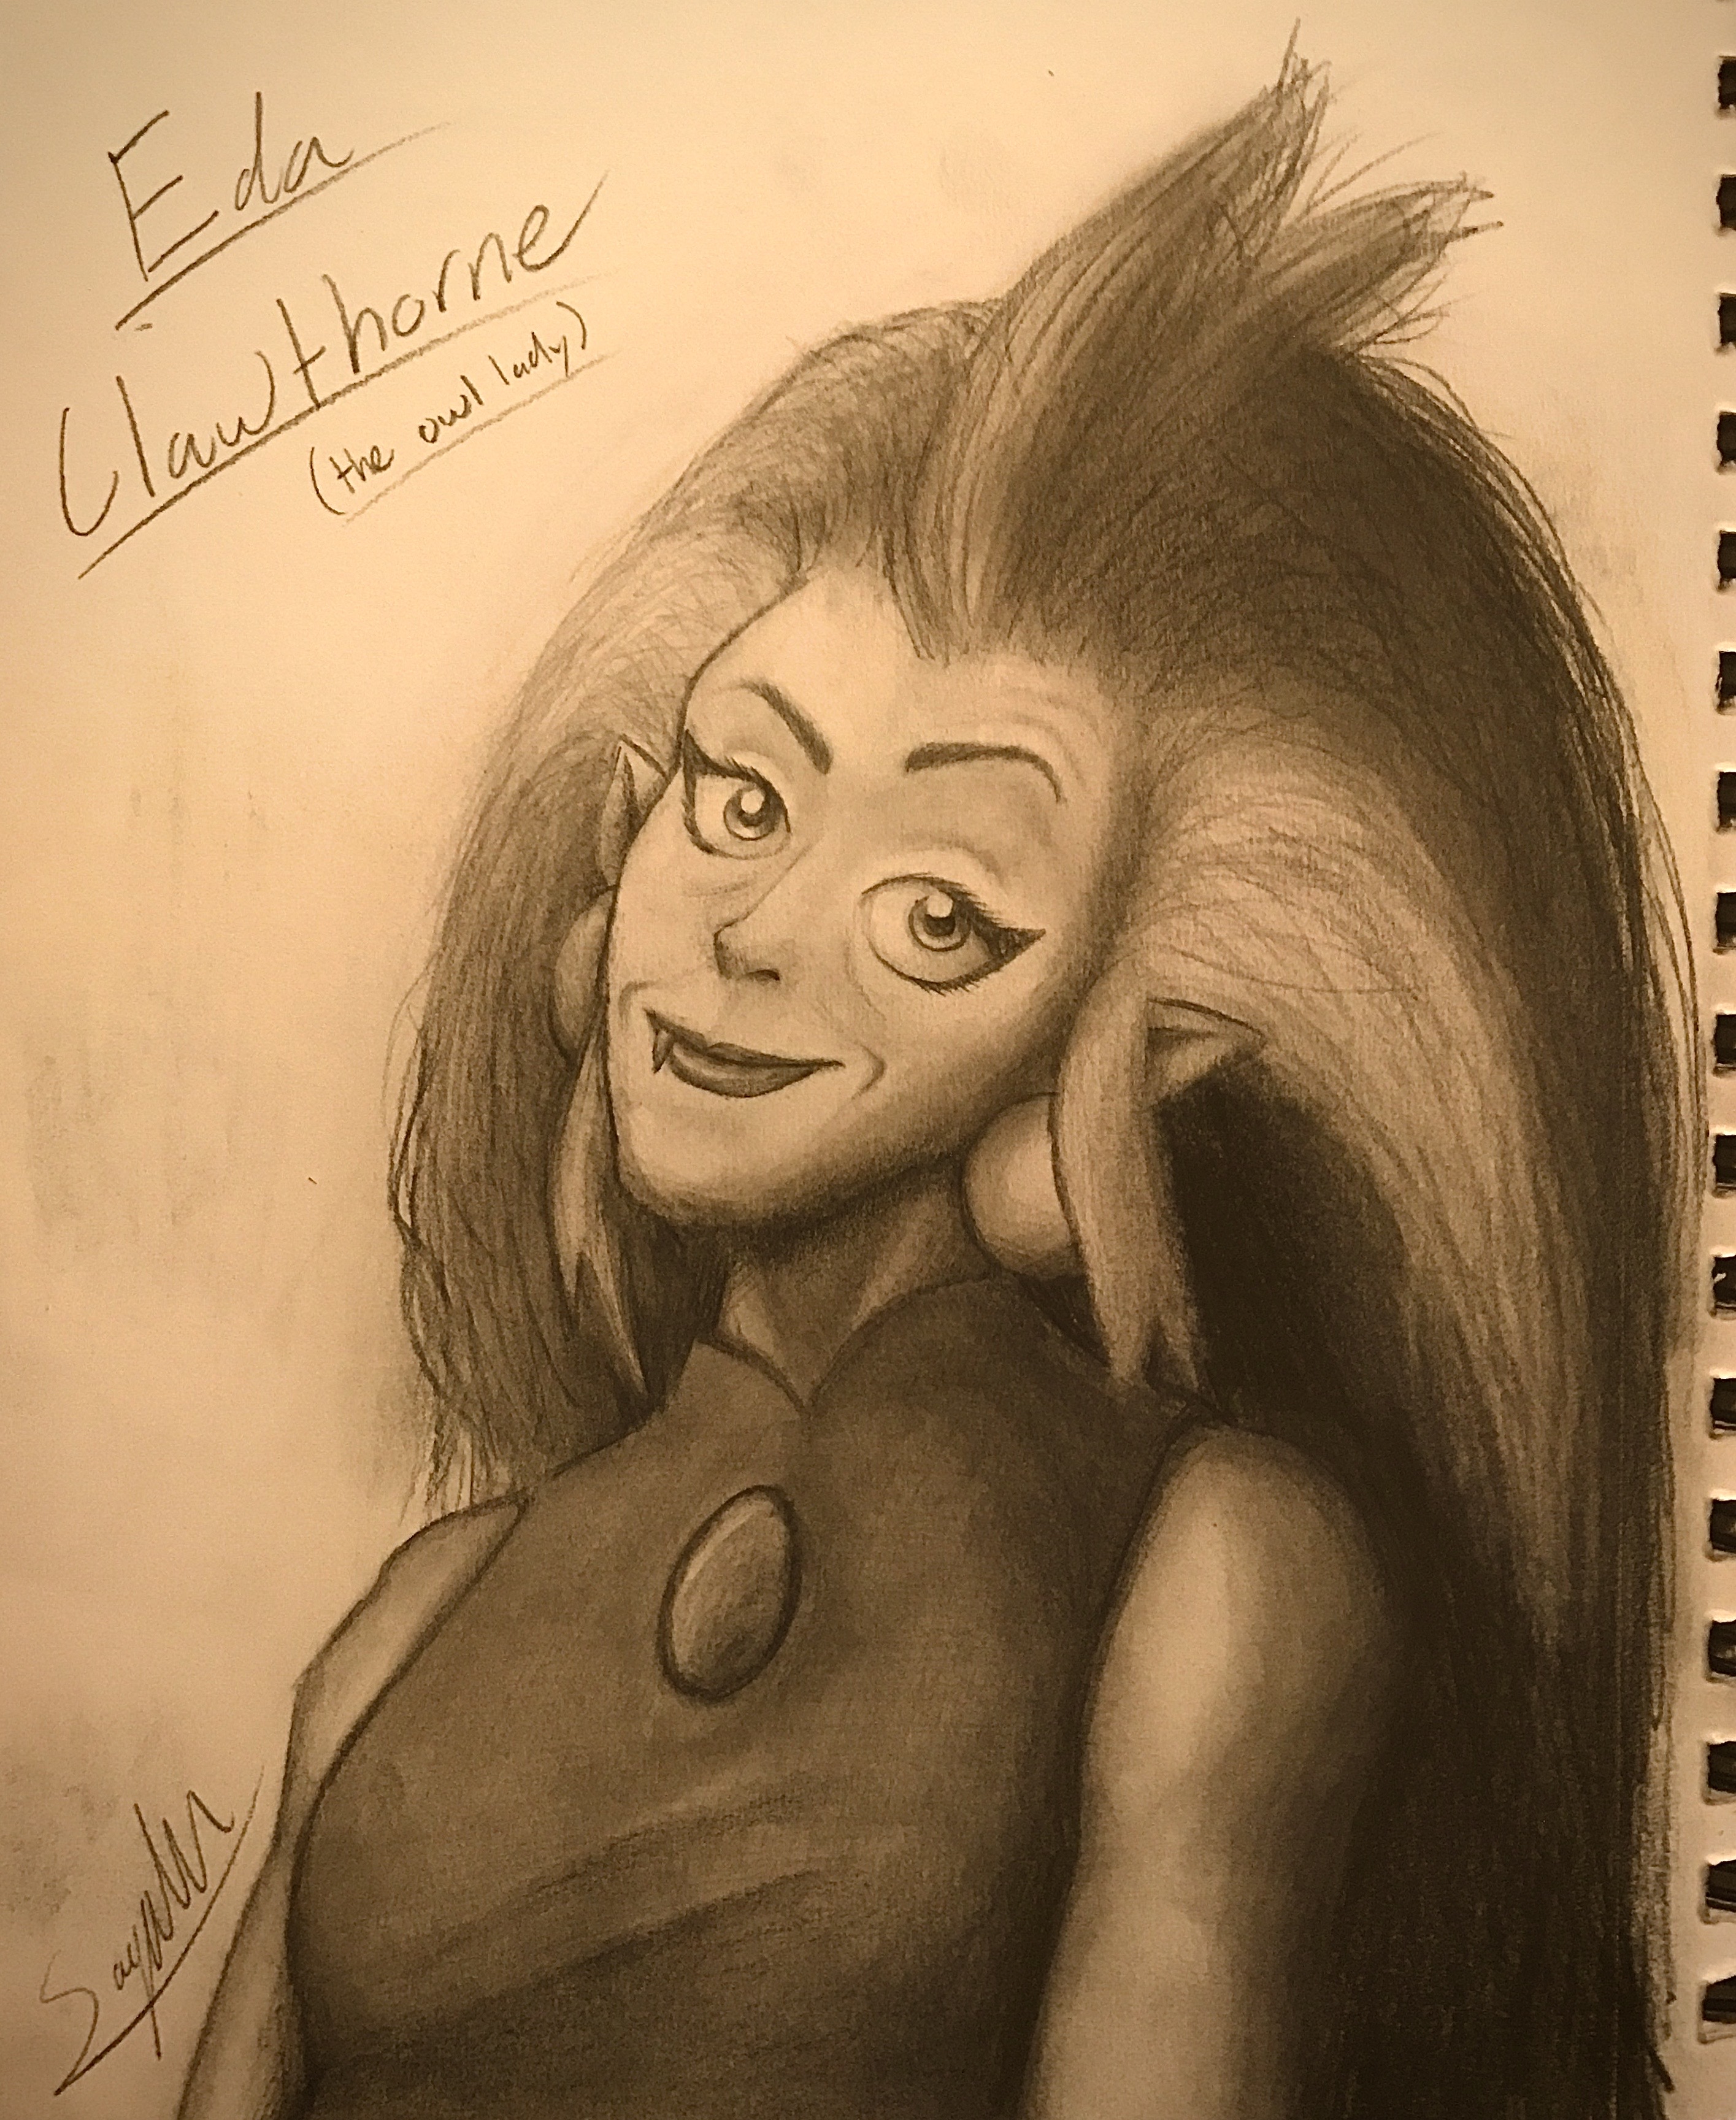 Portrait of eda clawthorne from the show